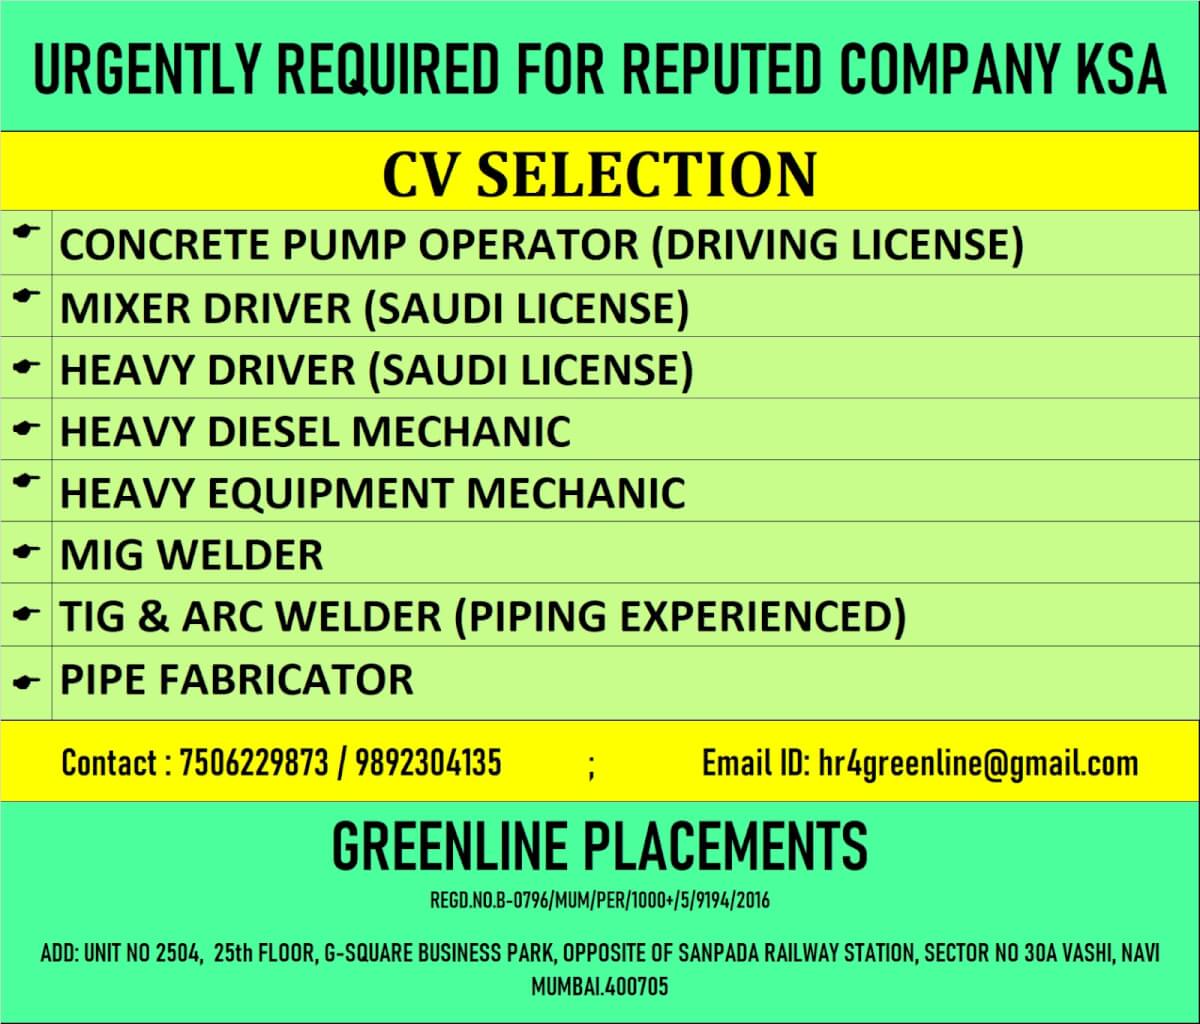 URGENTLY REQUIRED FOR REPUTED COMPANY KSA